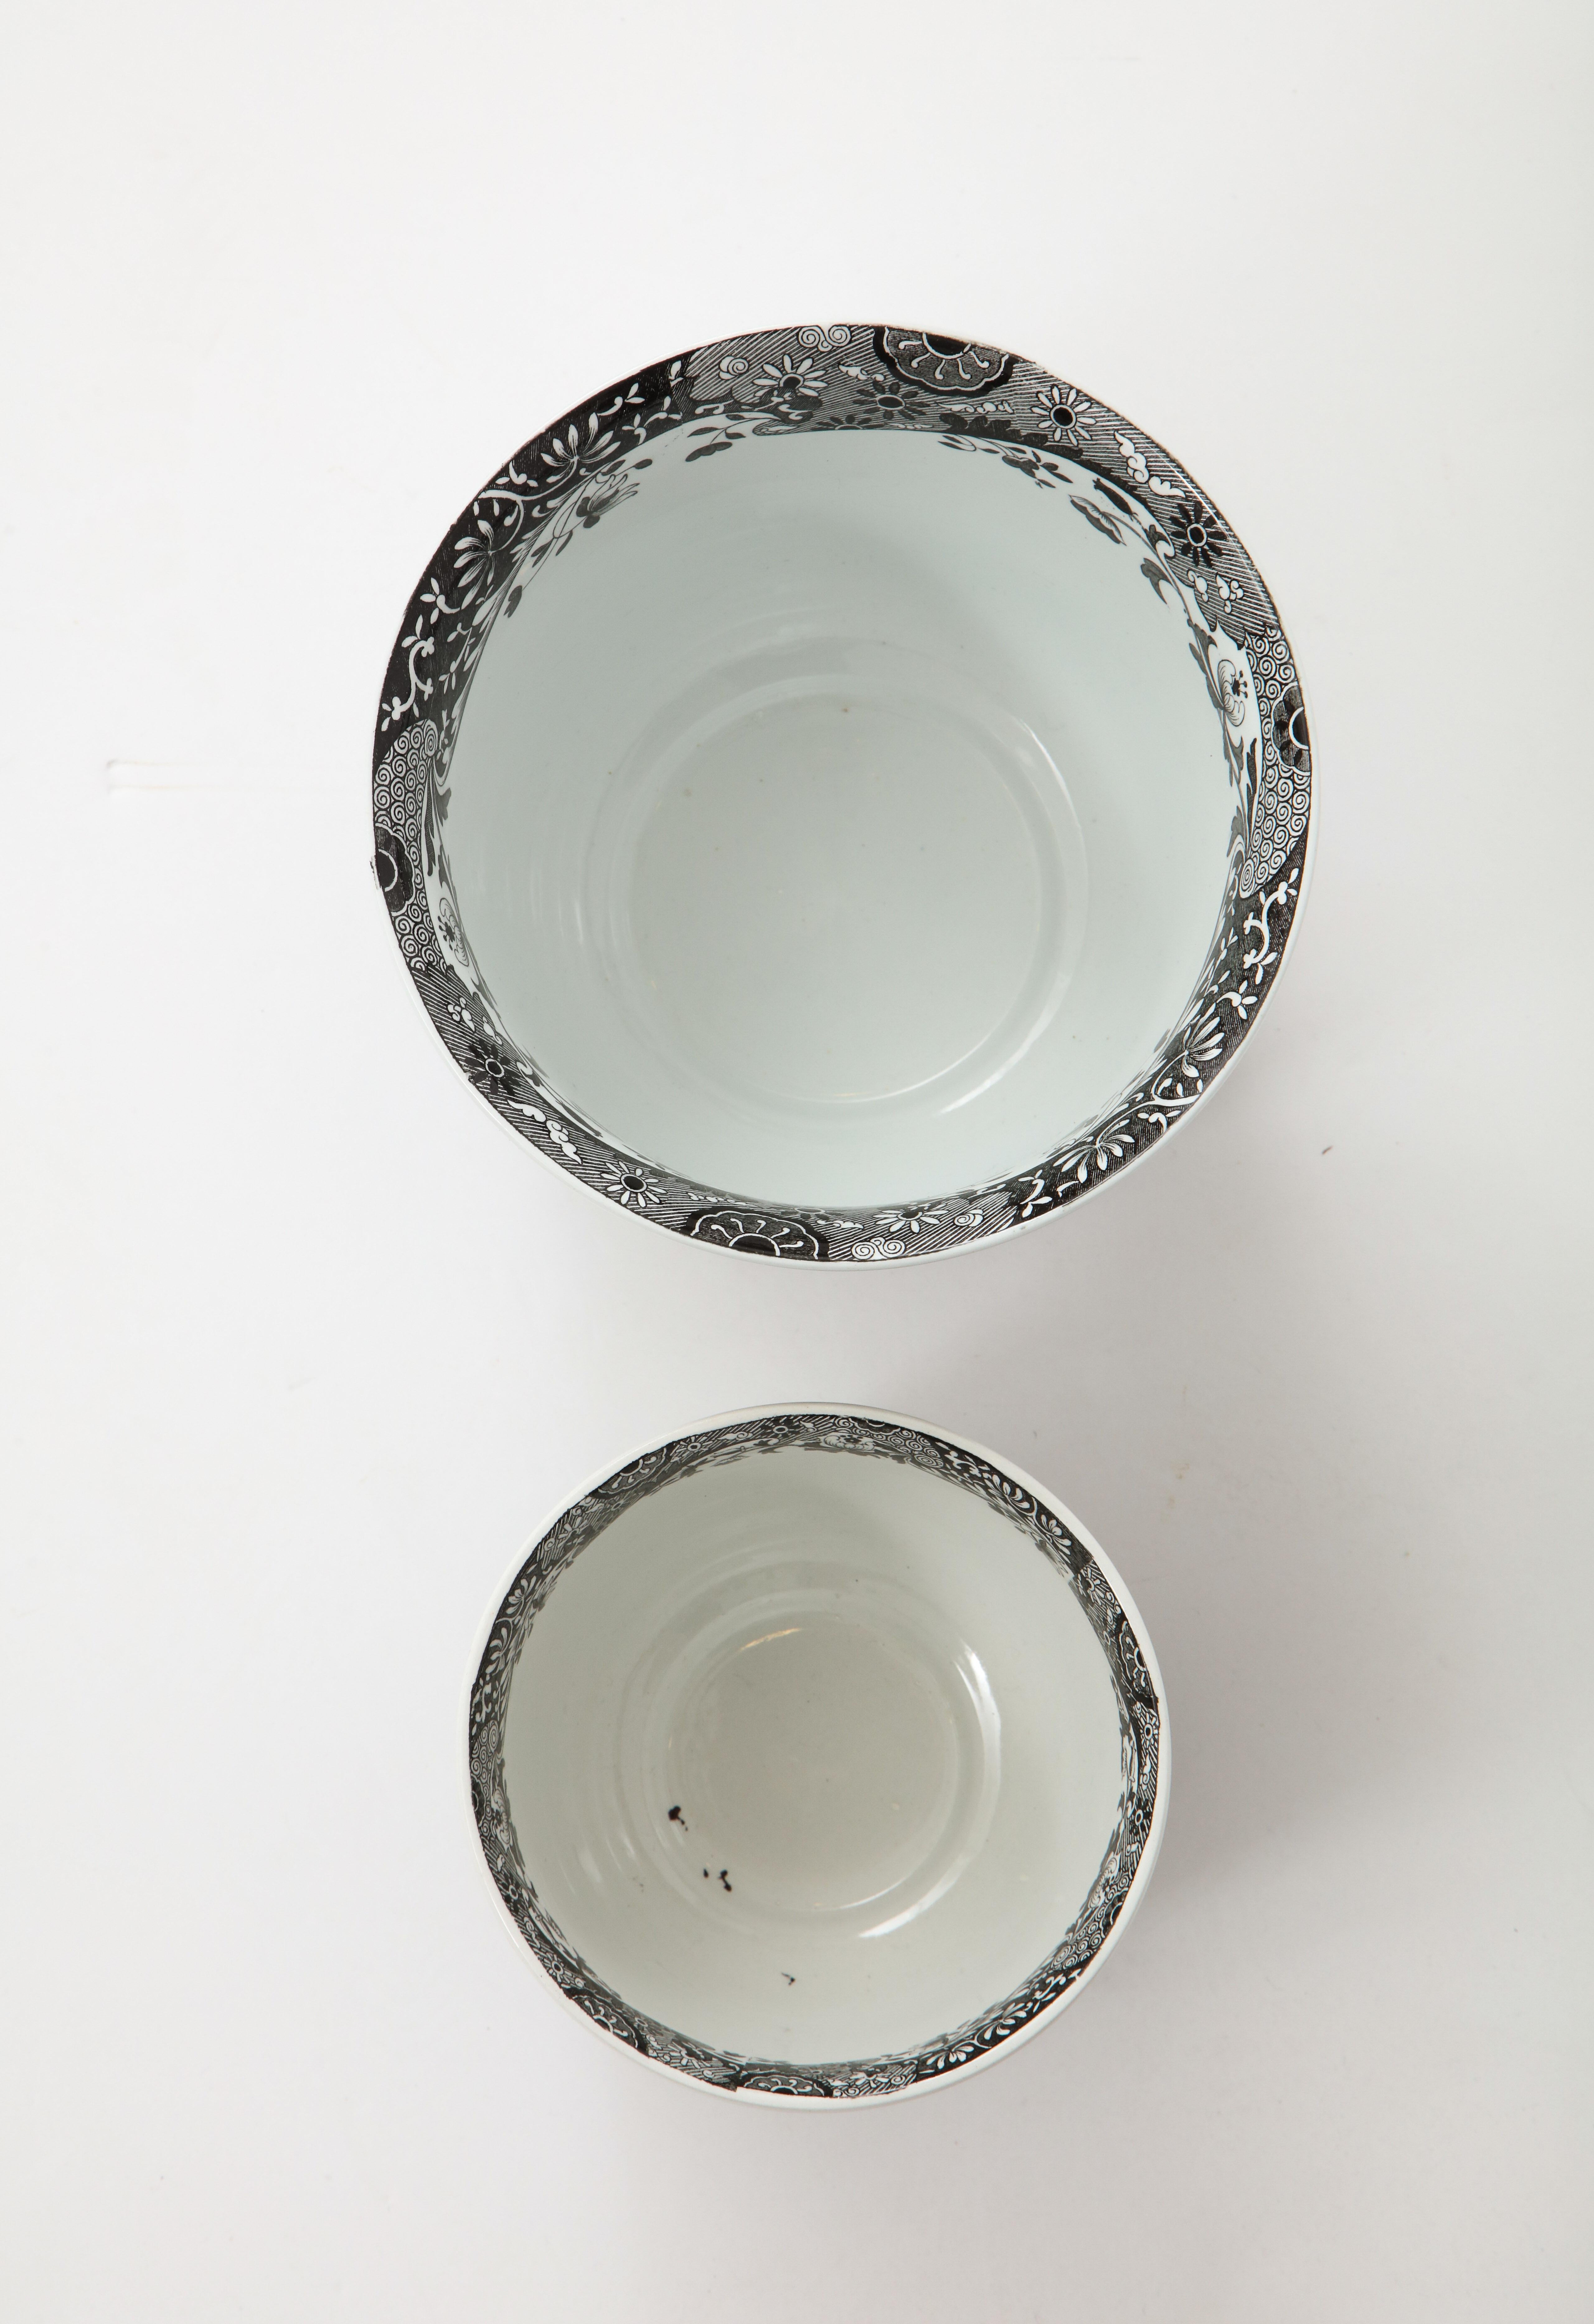 Pair of Spode Black and White Cachepots 4